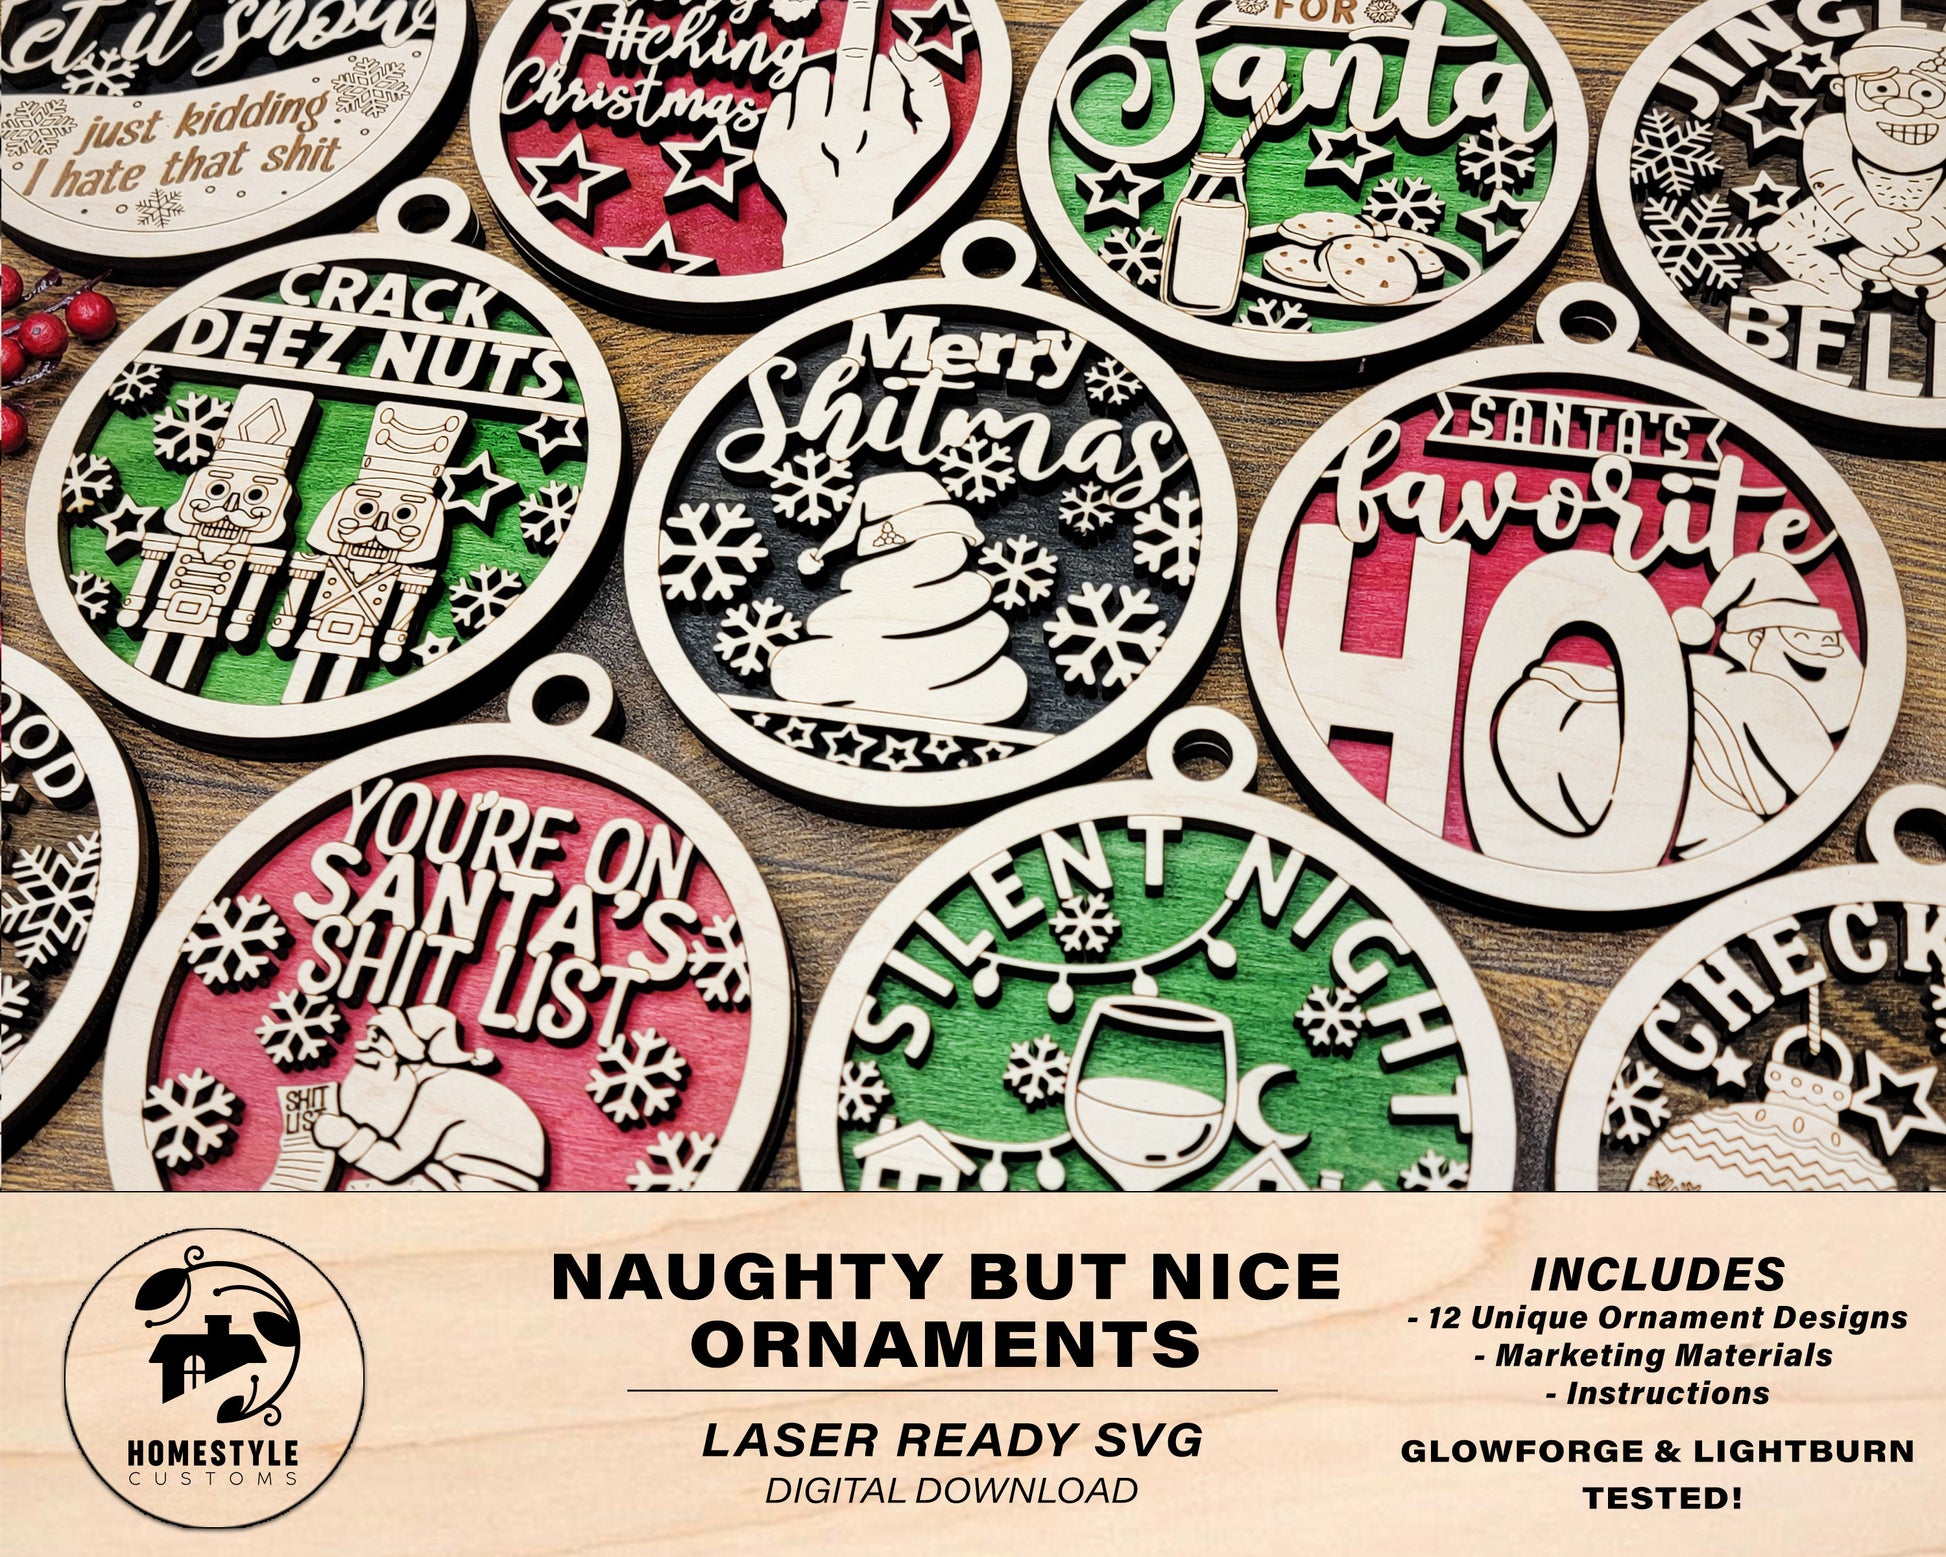 Naughty But Nice Ornaments - 12 Unique Laser Designs - SVG, PDF, AI File Download - Tested On Glowforge and LightBurn